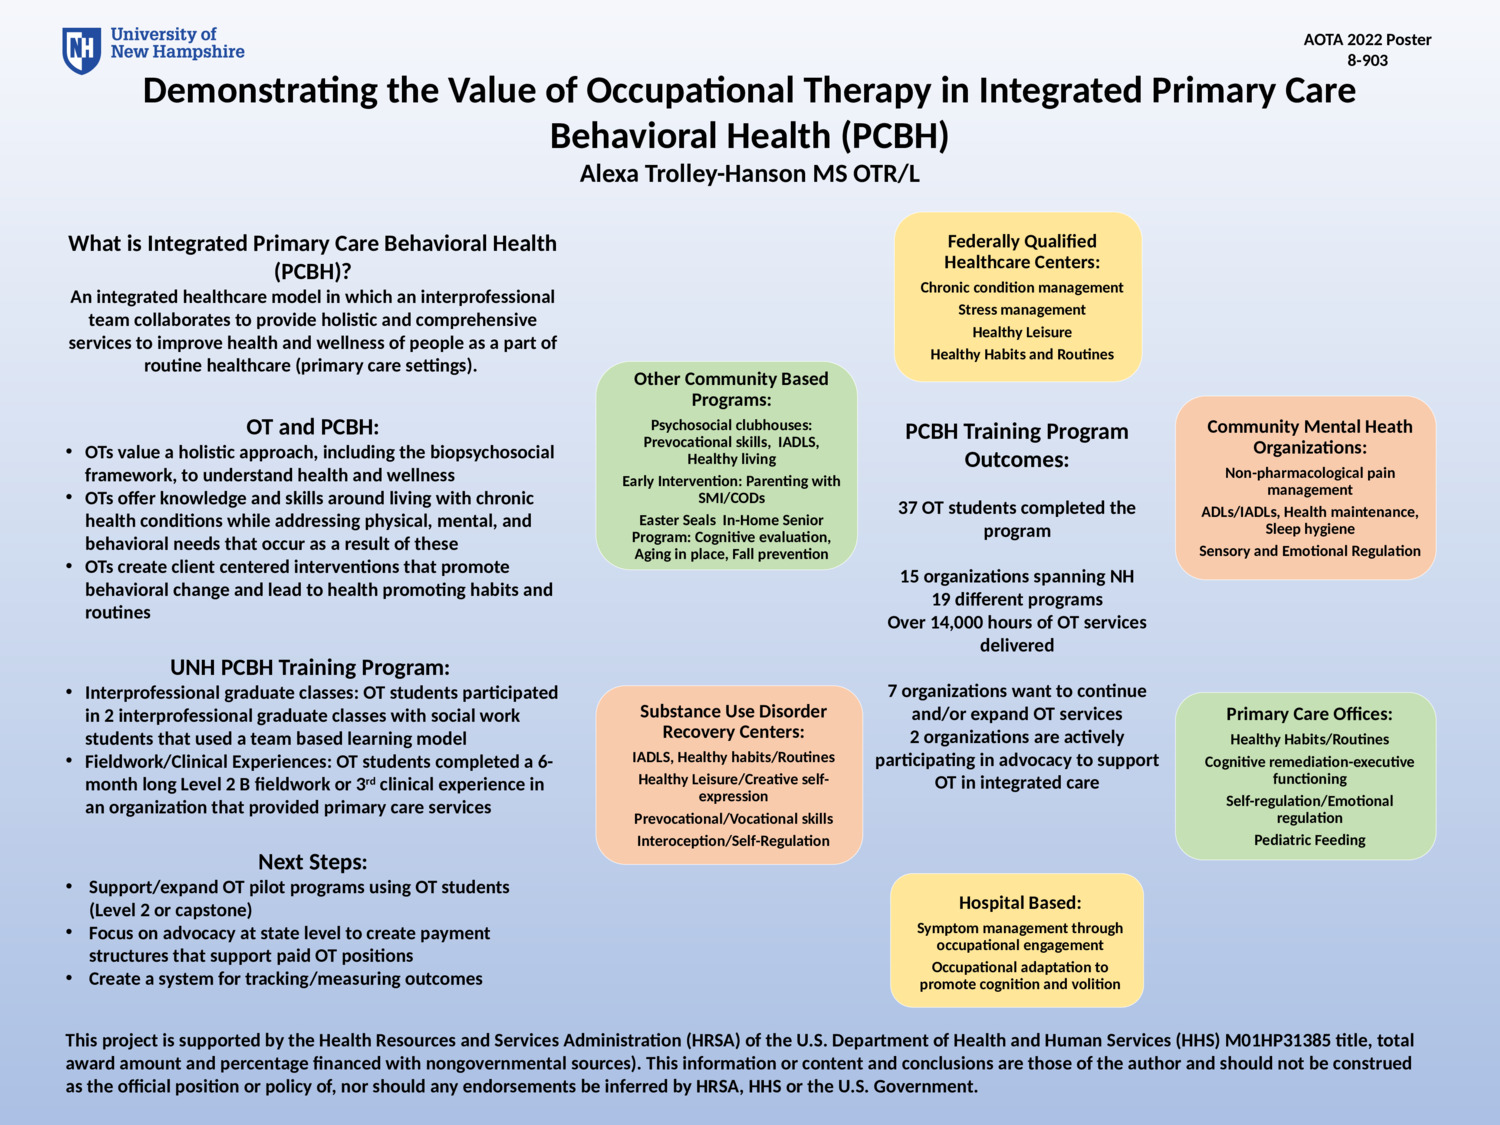 Demonstrating The Value Of Occupational Therapy In Integrated Primary Care Behavioral Health (Pcbh) by atrolley